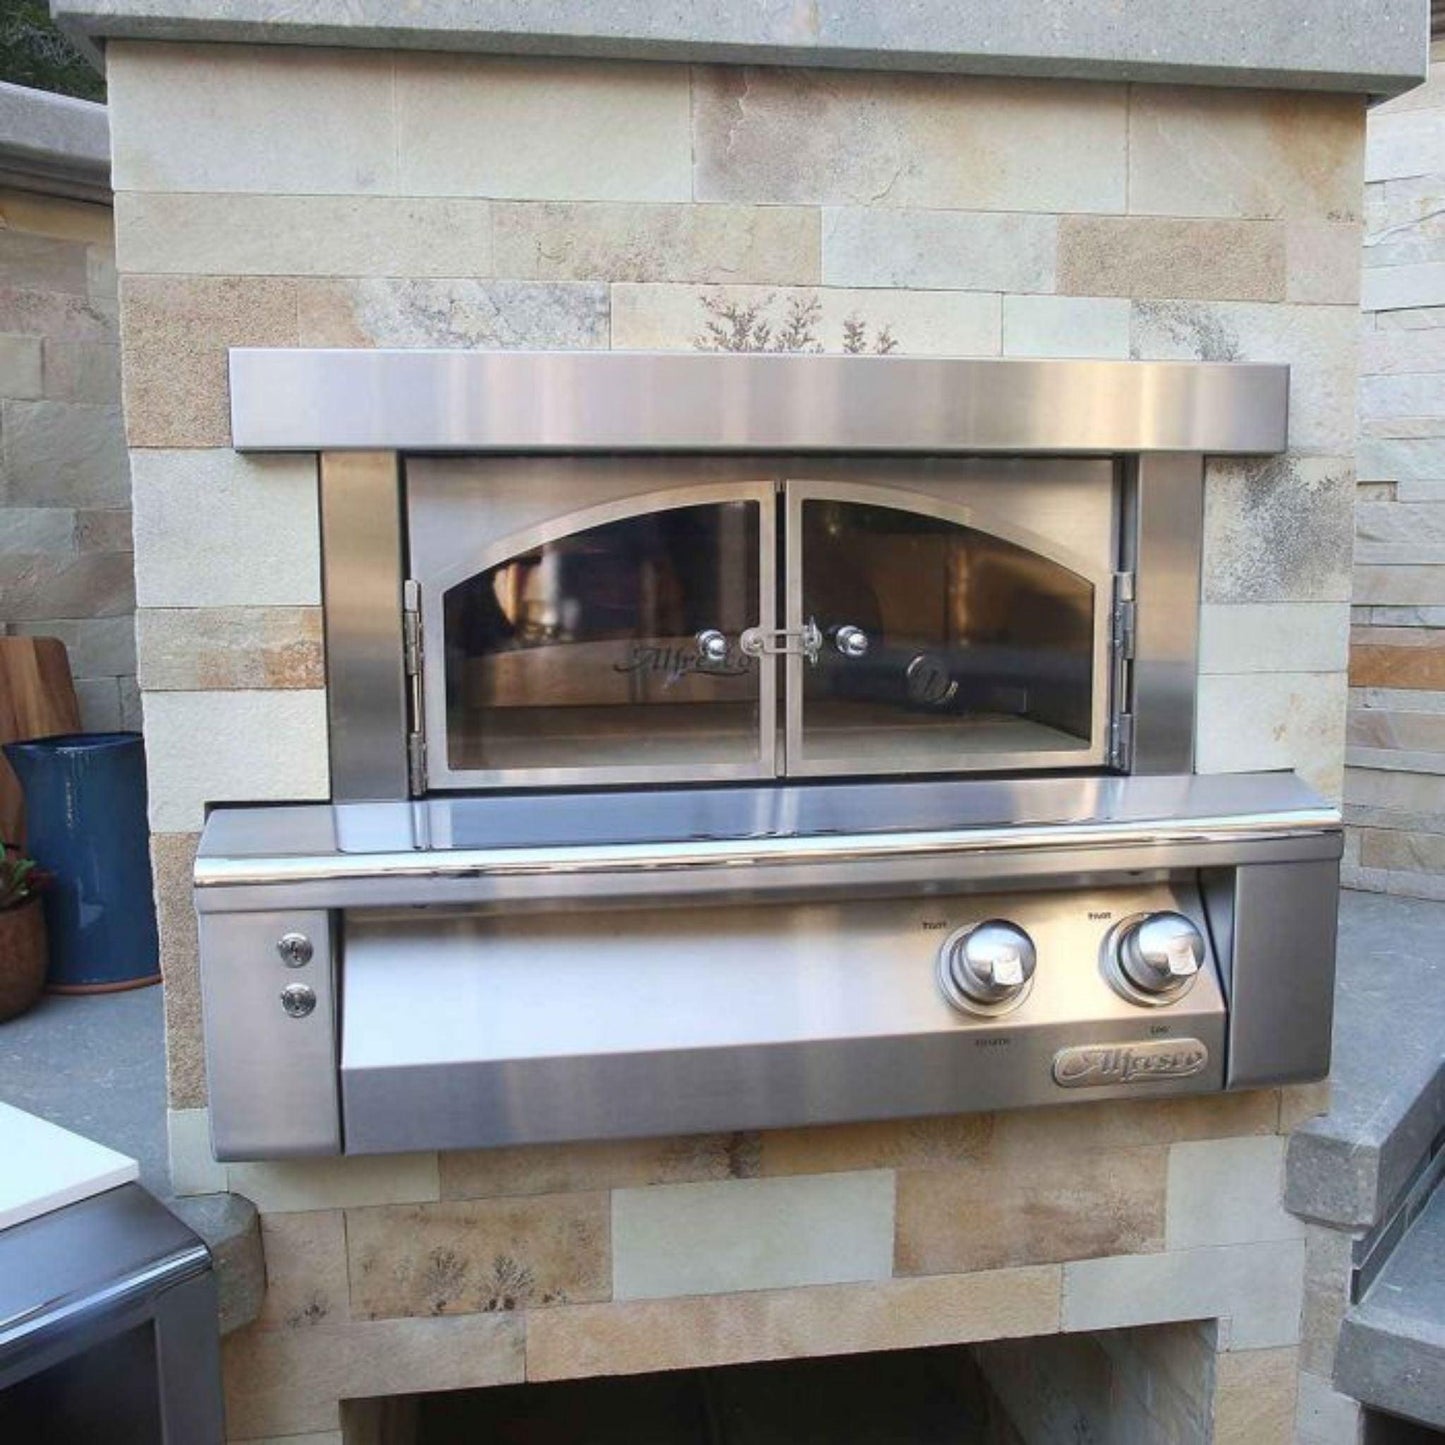 Alfresco 30" Jet Black Gloss Natural Gas Pizza Oven for Built-in Installations